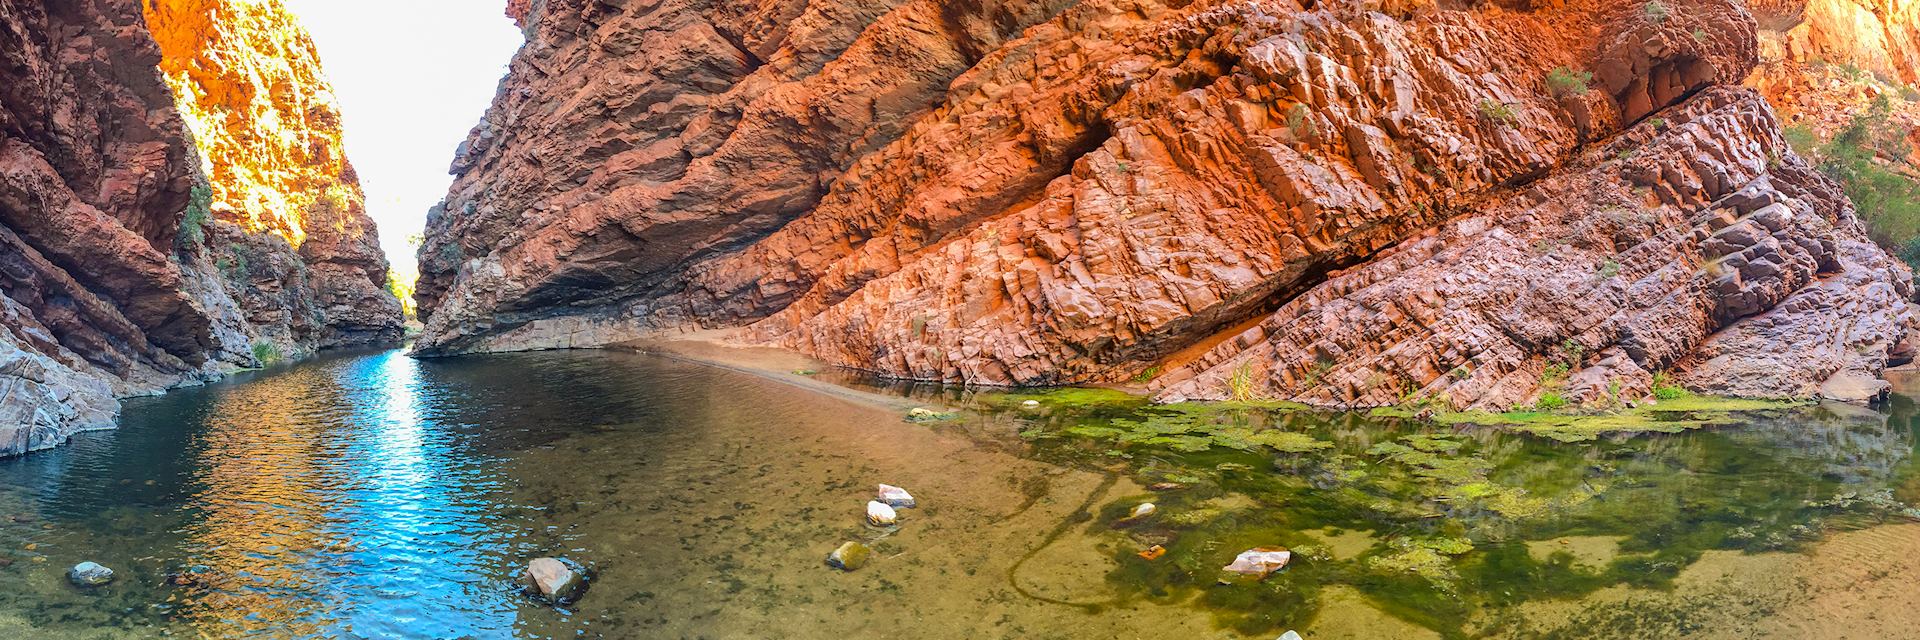 ketcher Narkoman Hop ind Top 3 essential experiences in Australia's Northern Territory | Audley  Travel US